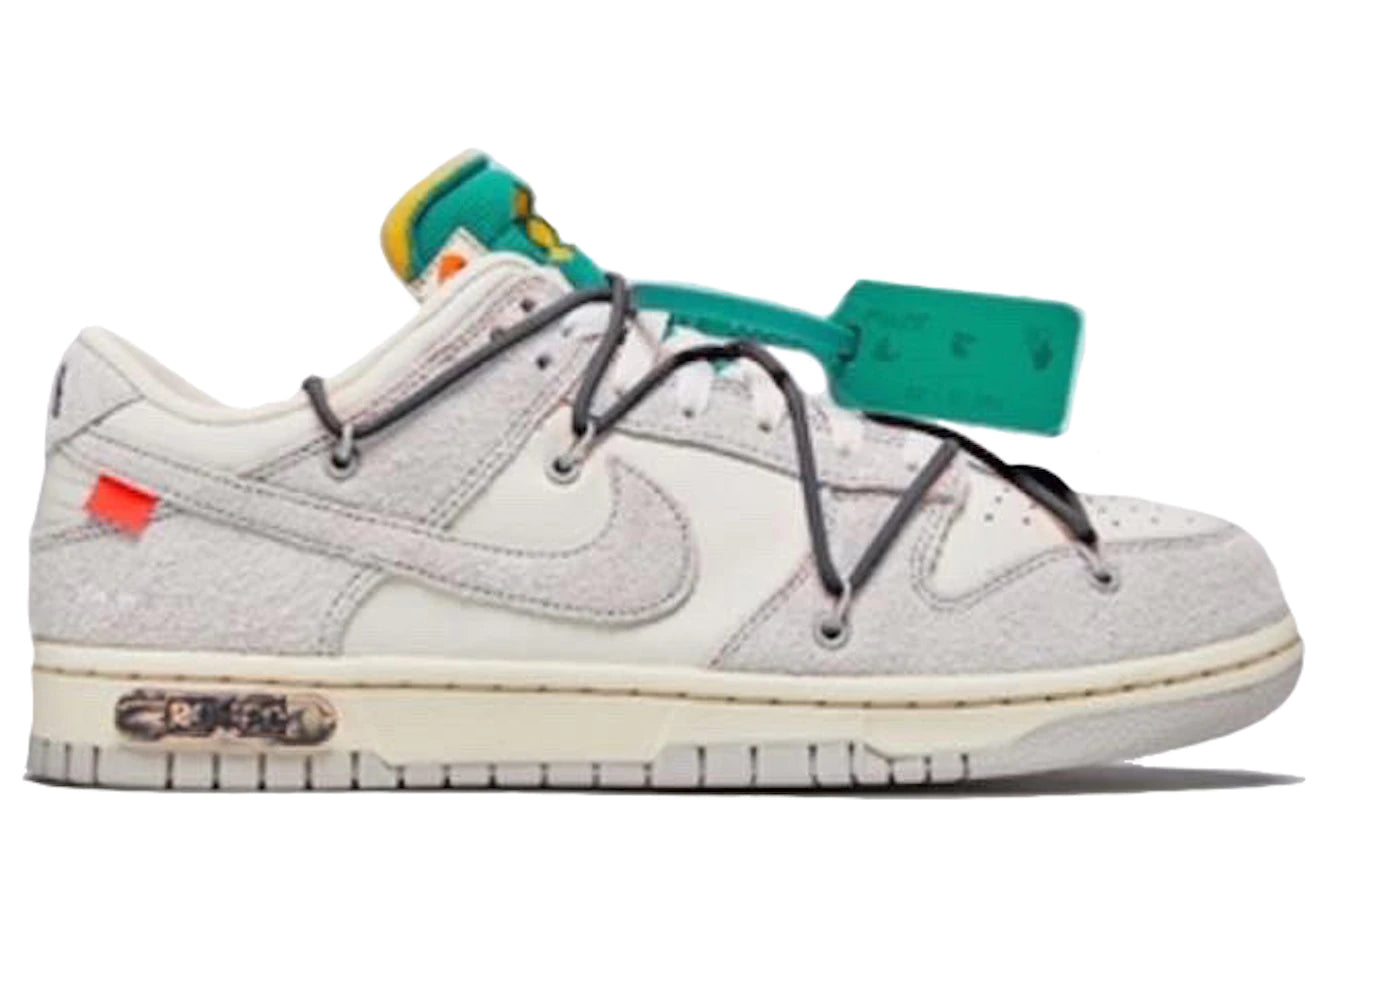 Nike x Off-White Dunk Low Lot 20 of 50